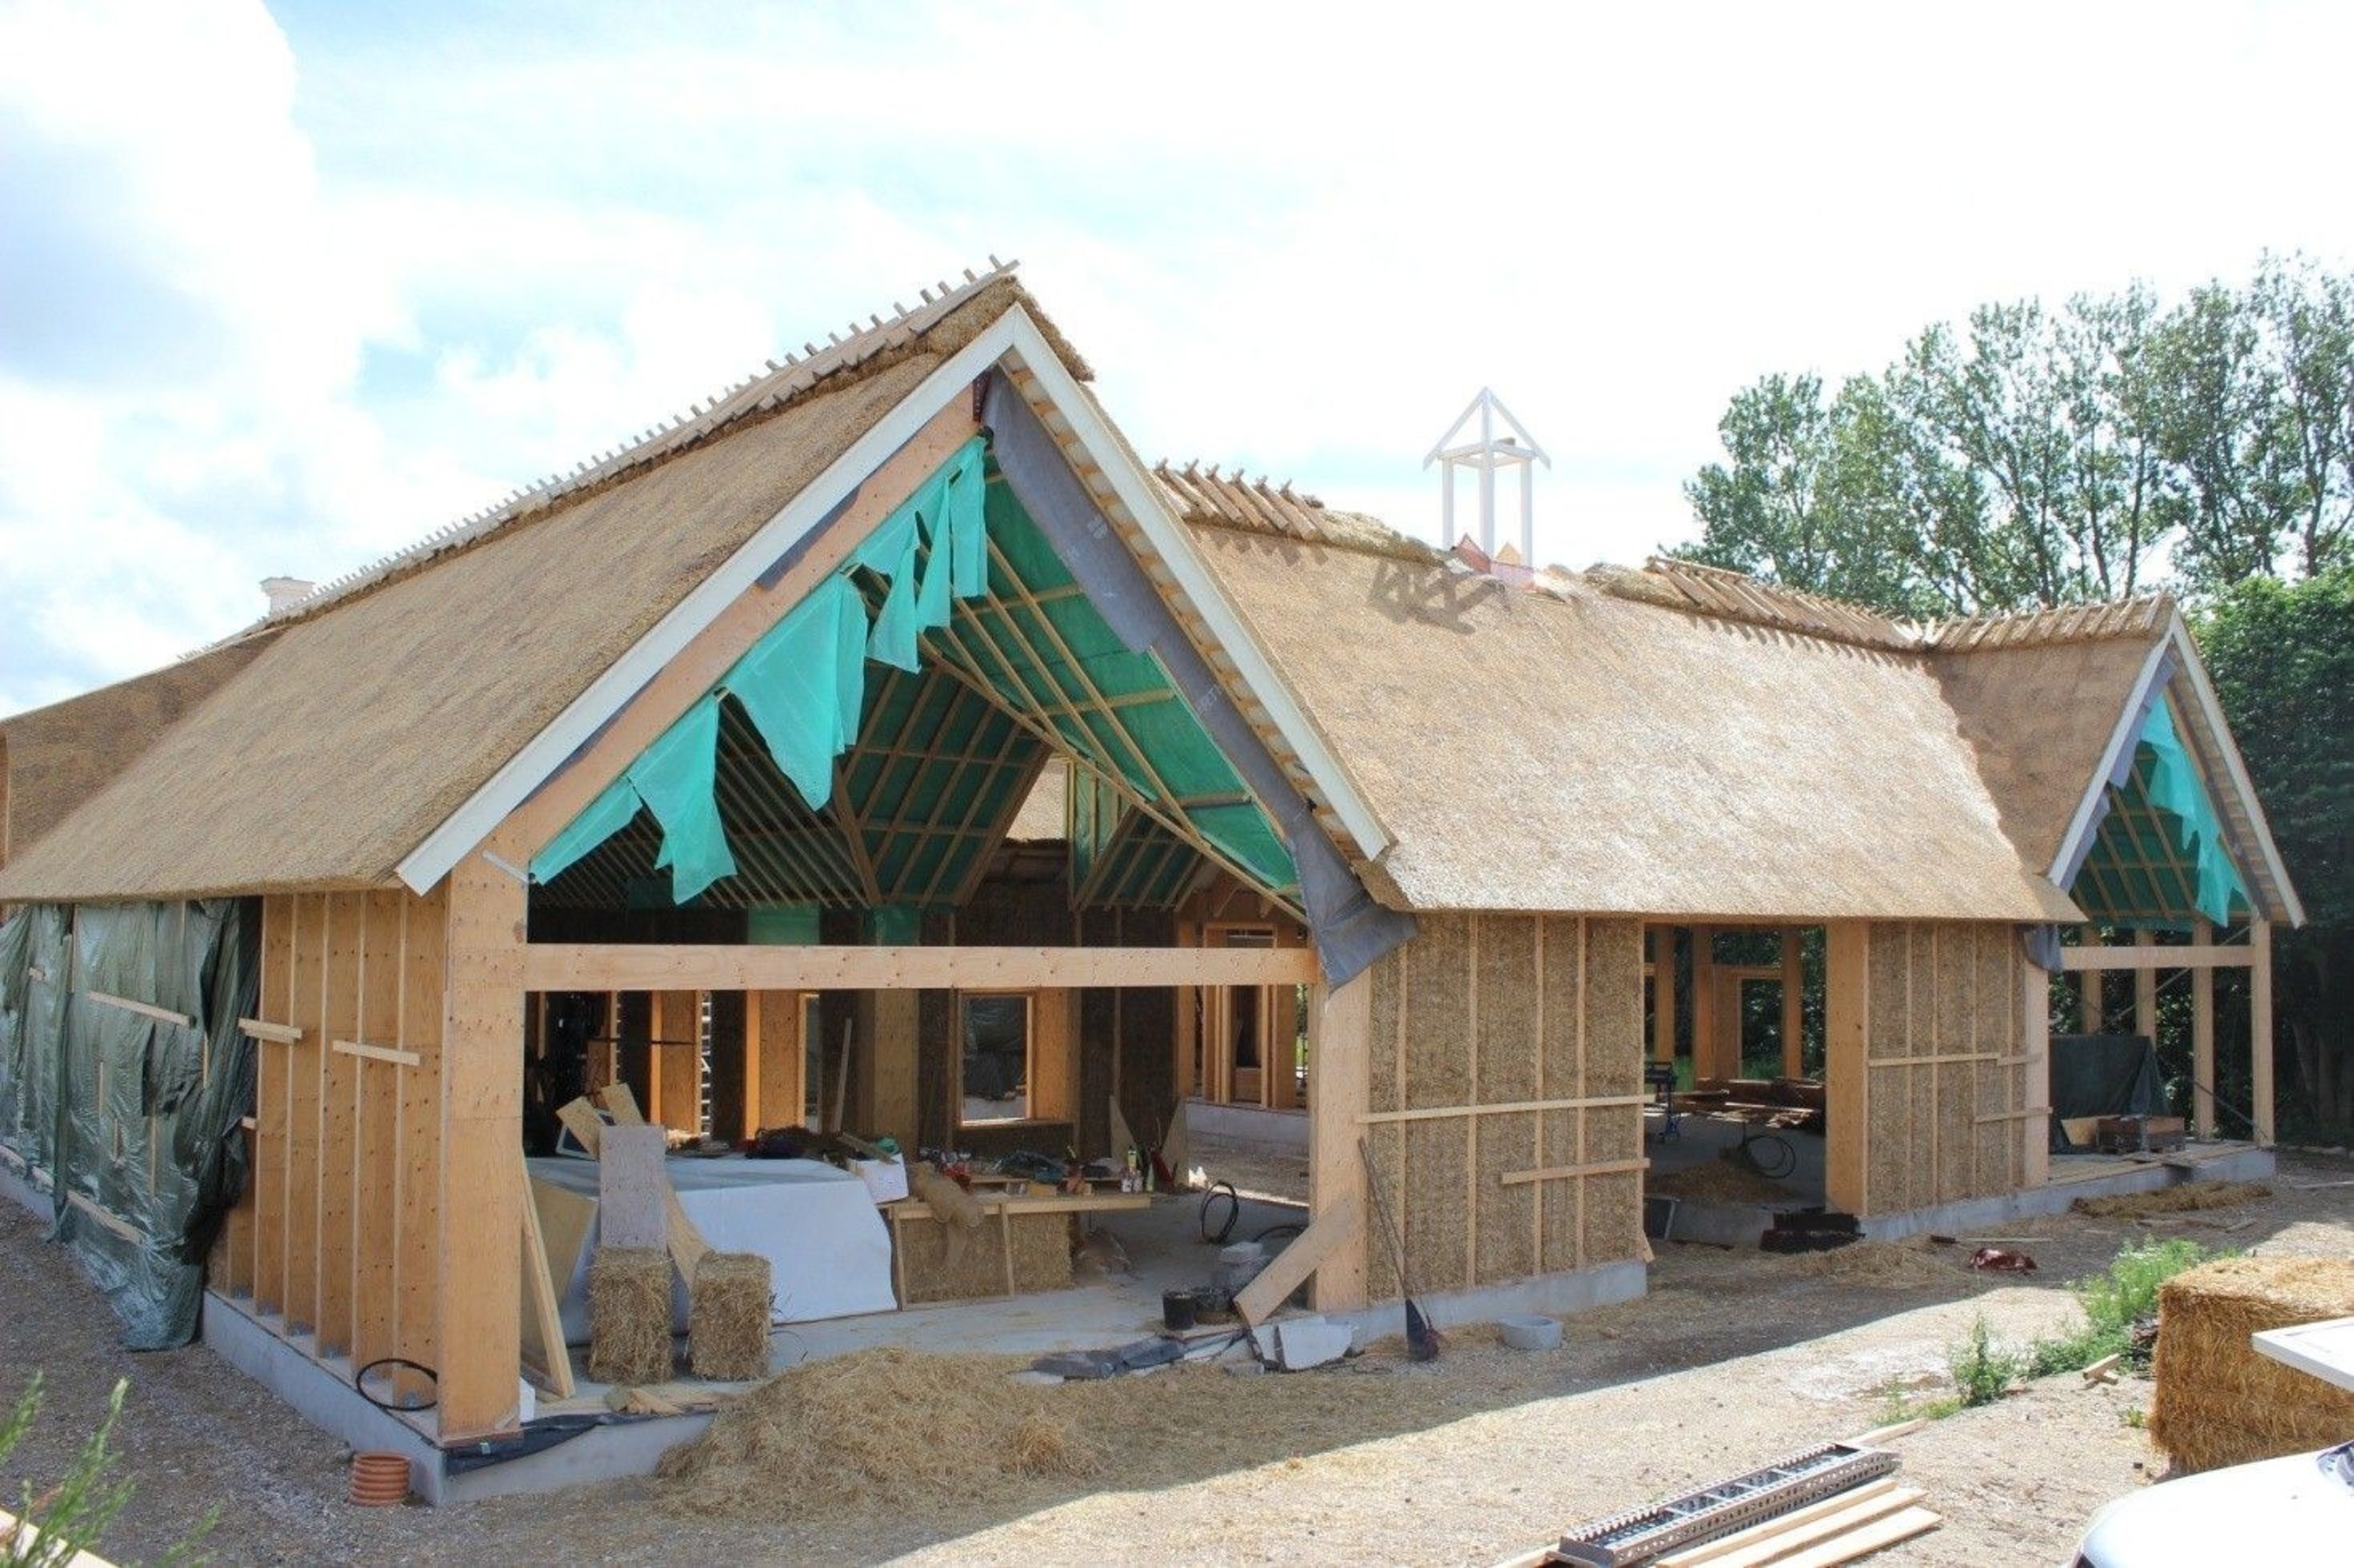 Straagaarden is building a sustainable future (PRNewsFoto/Metsa Wood) (PRNewsFoto/Metsa Wood)